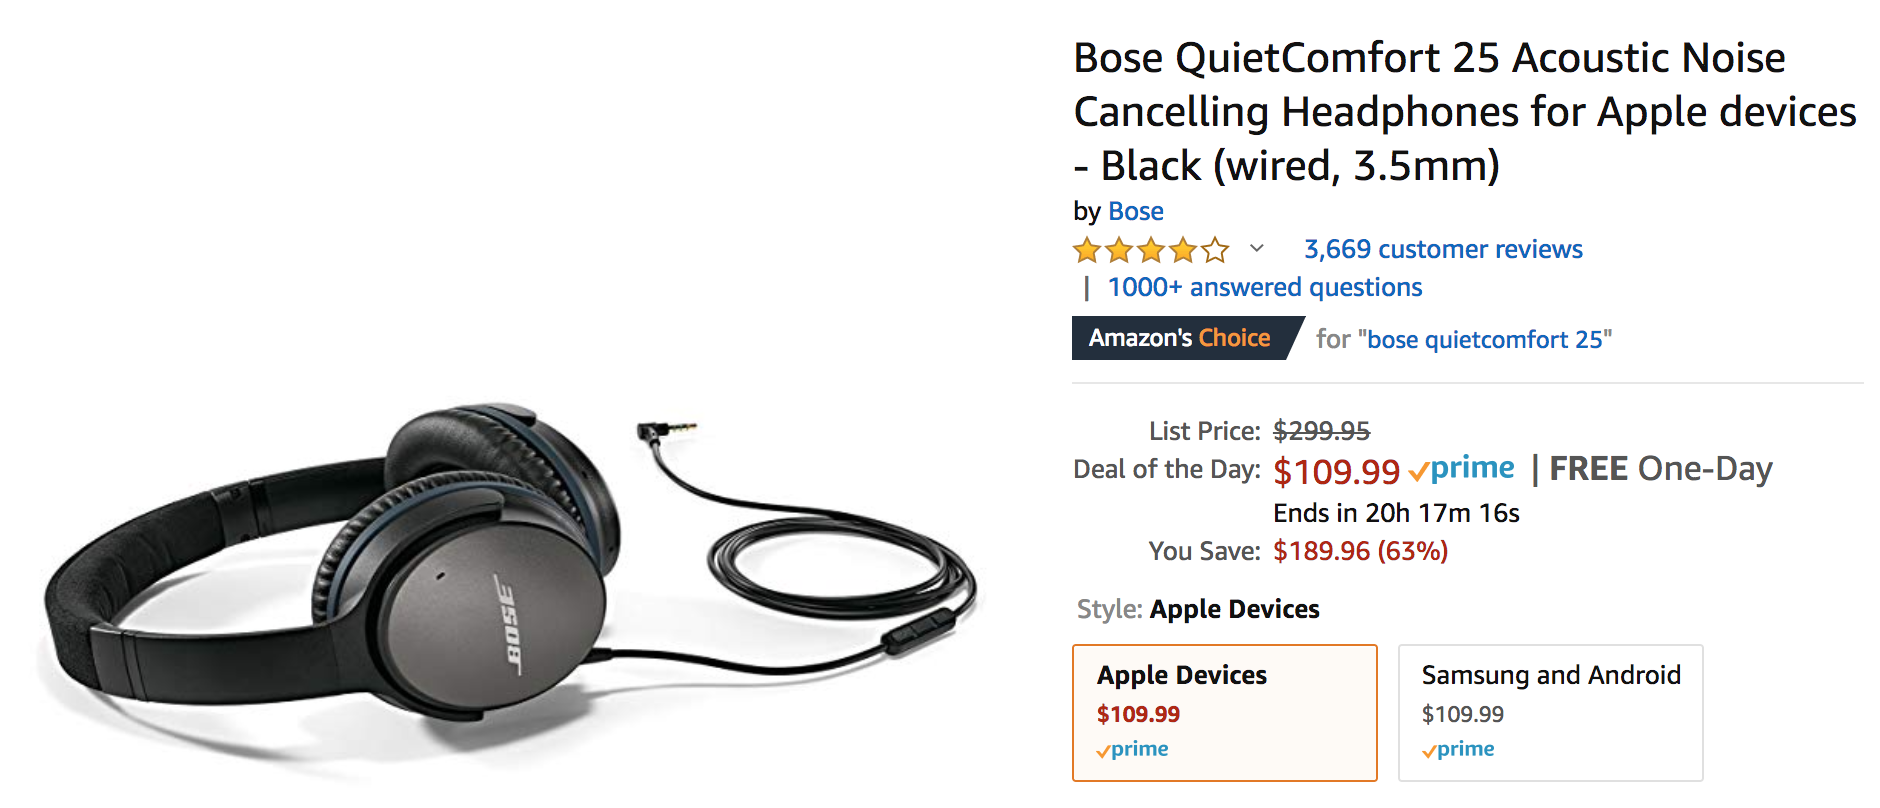 a black headphones with a cord